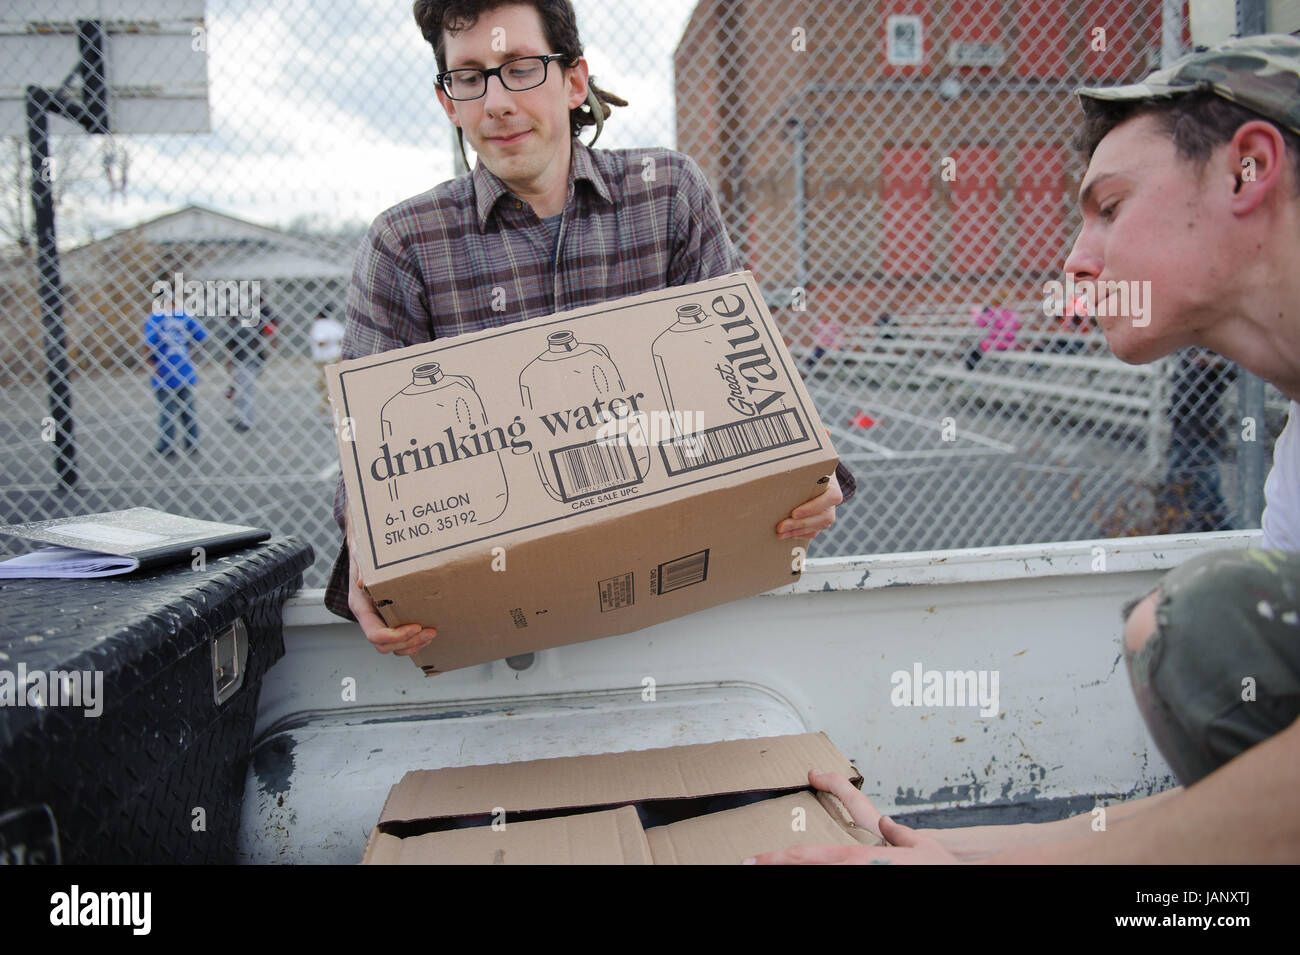 Volunteer Casey Pegg from Pittsburgh (left), and Ben Fiorillio also of Pittsburgh (right), load Fiorillo's pickup truck for home water deliveries in Charleston, WV. The two are part of the WV Clean Water Hub, an organization formed to deliver donated water and supplies to people needing safe drinking water after the Elk River chemical spill Jan. 9. Stock Photo